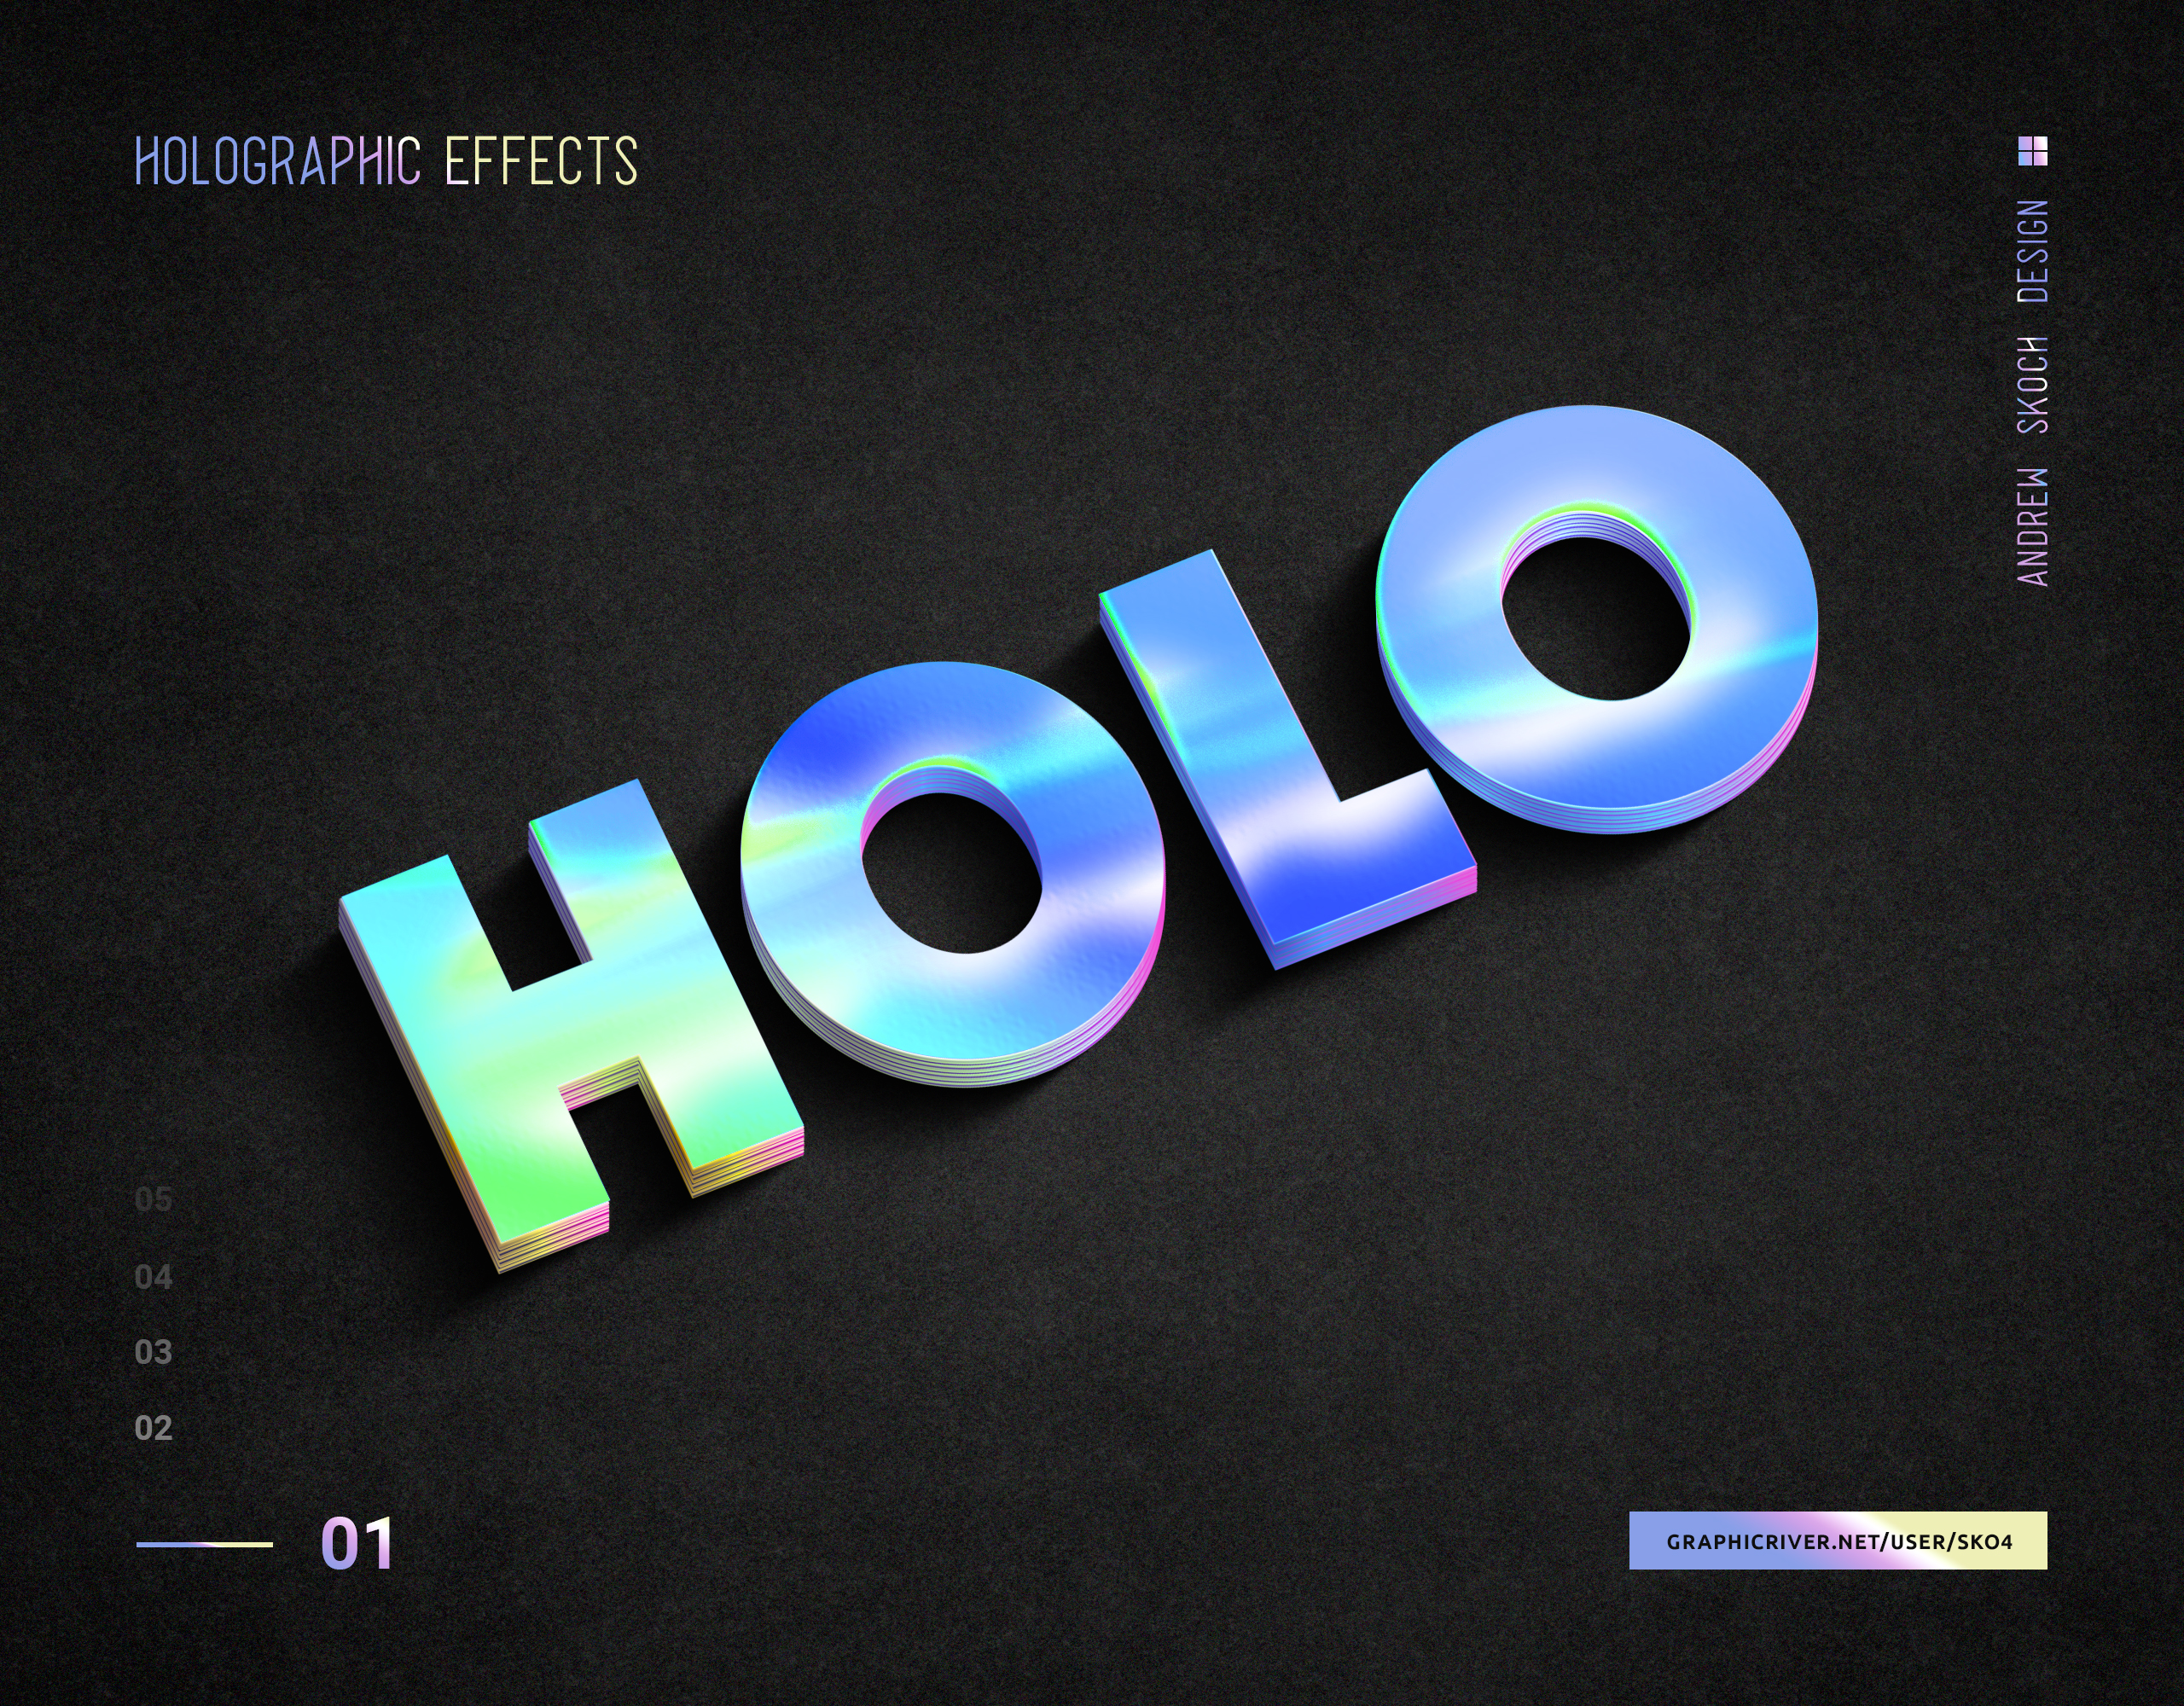 Download Holographic Text Effects vol 2 by Sko4 | GraphicRiver